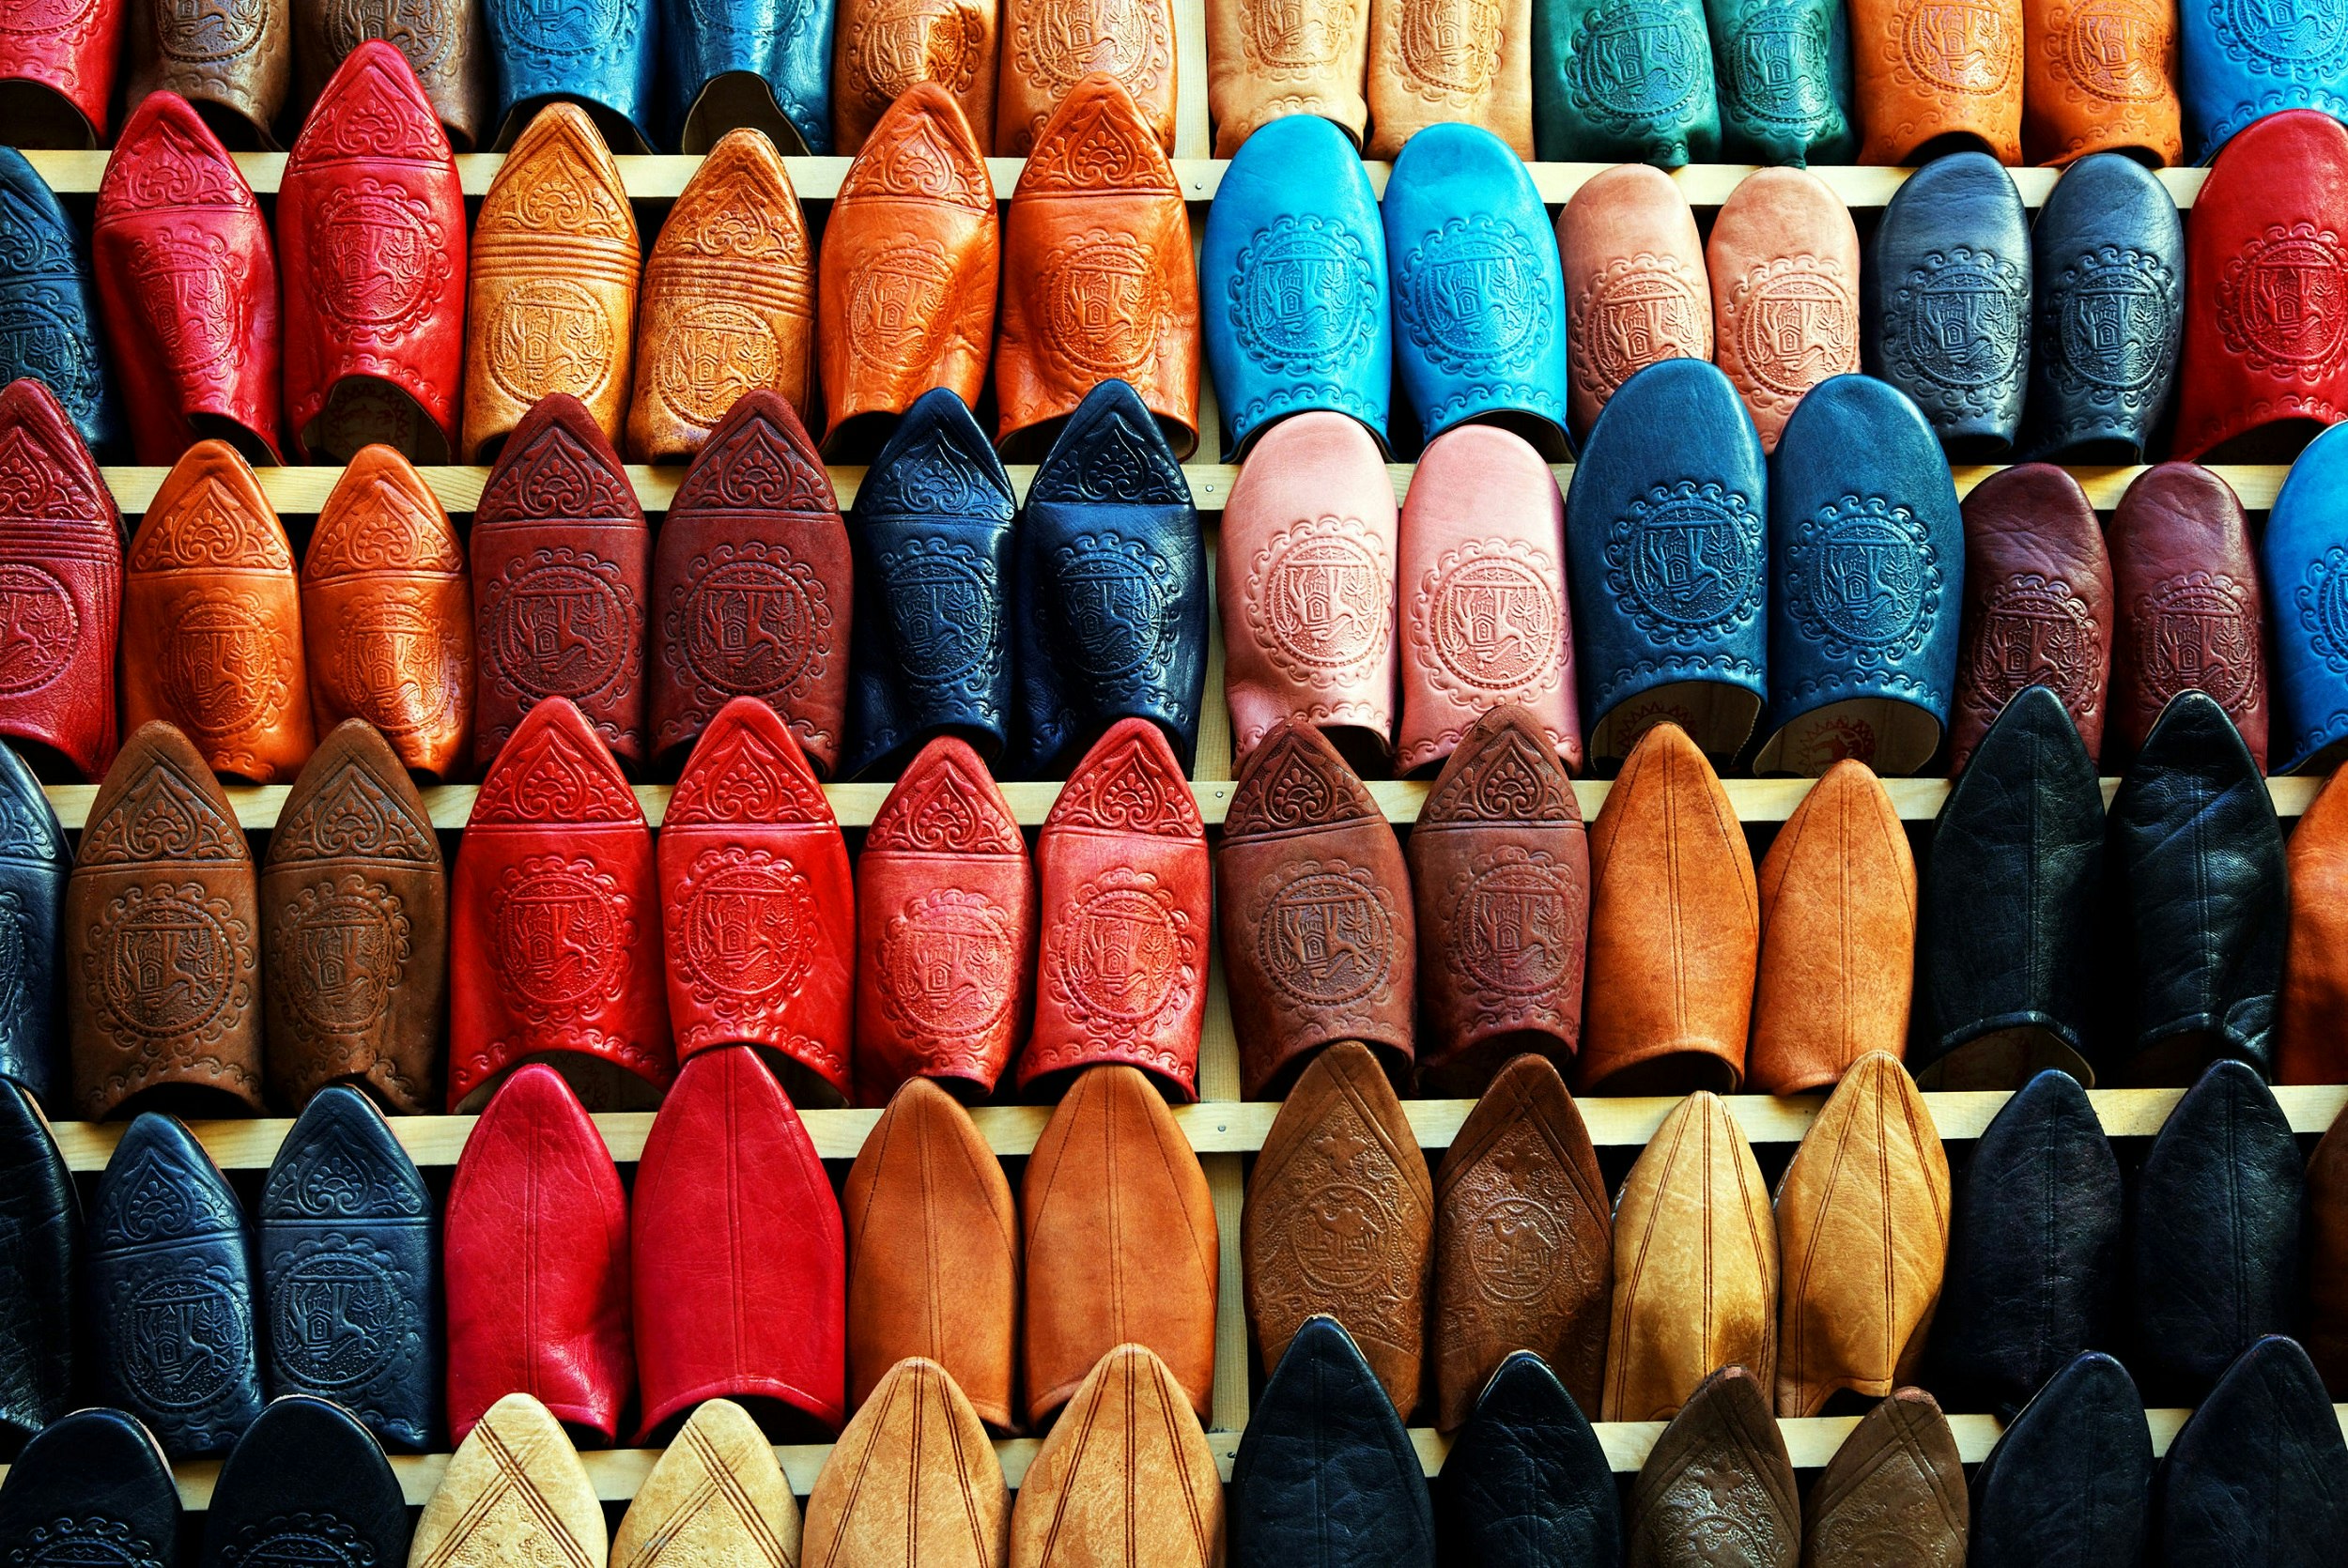 The entire shot is filled with a wall covered in traditional Moroccan slippers; they are all hanging vertically, with the colourful toe of each slipper being visible.